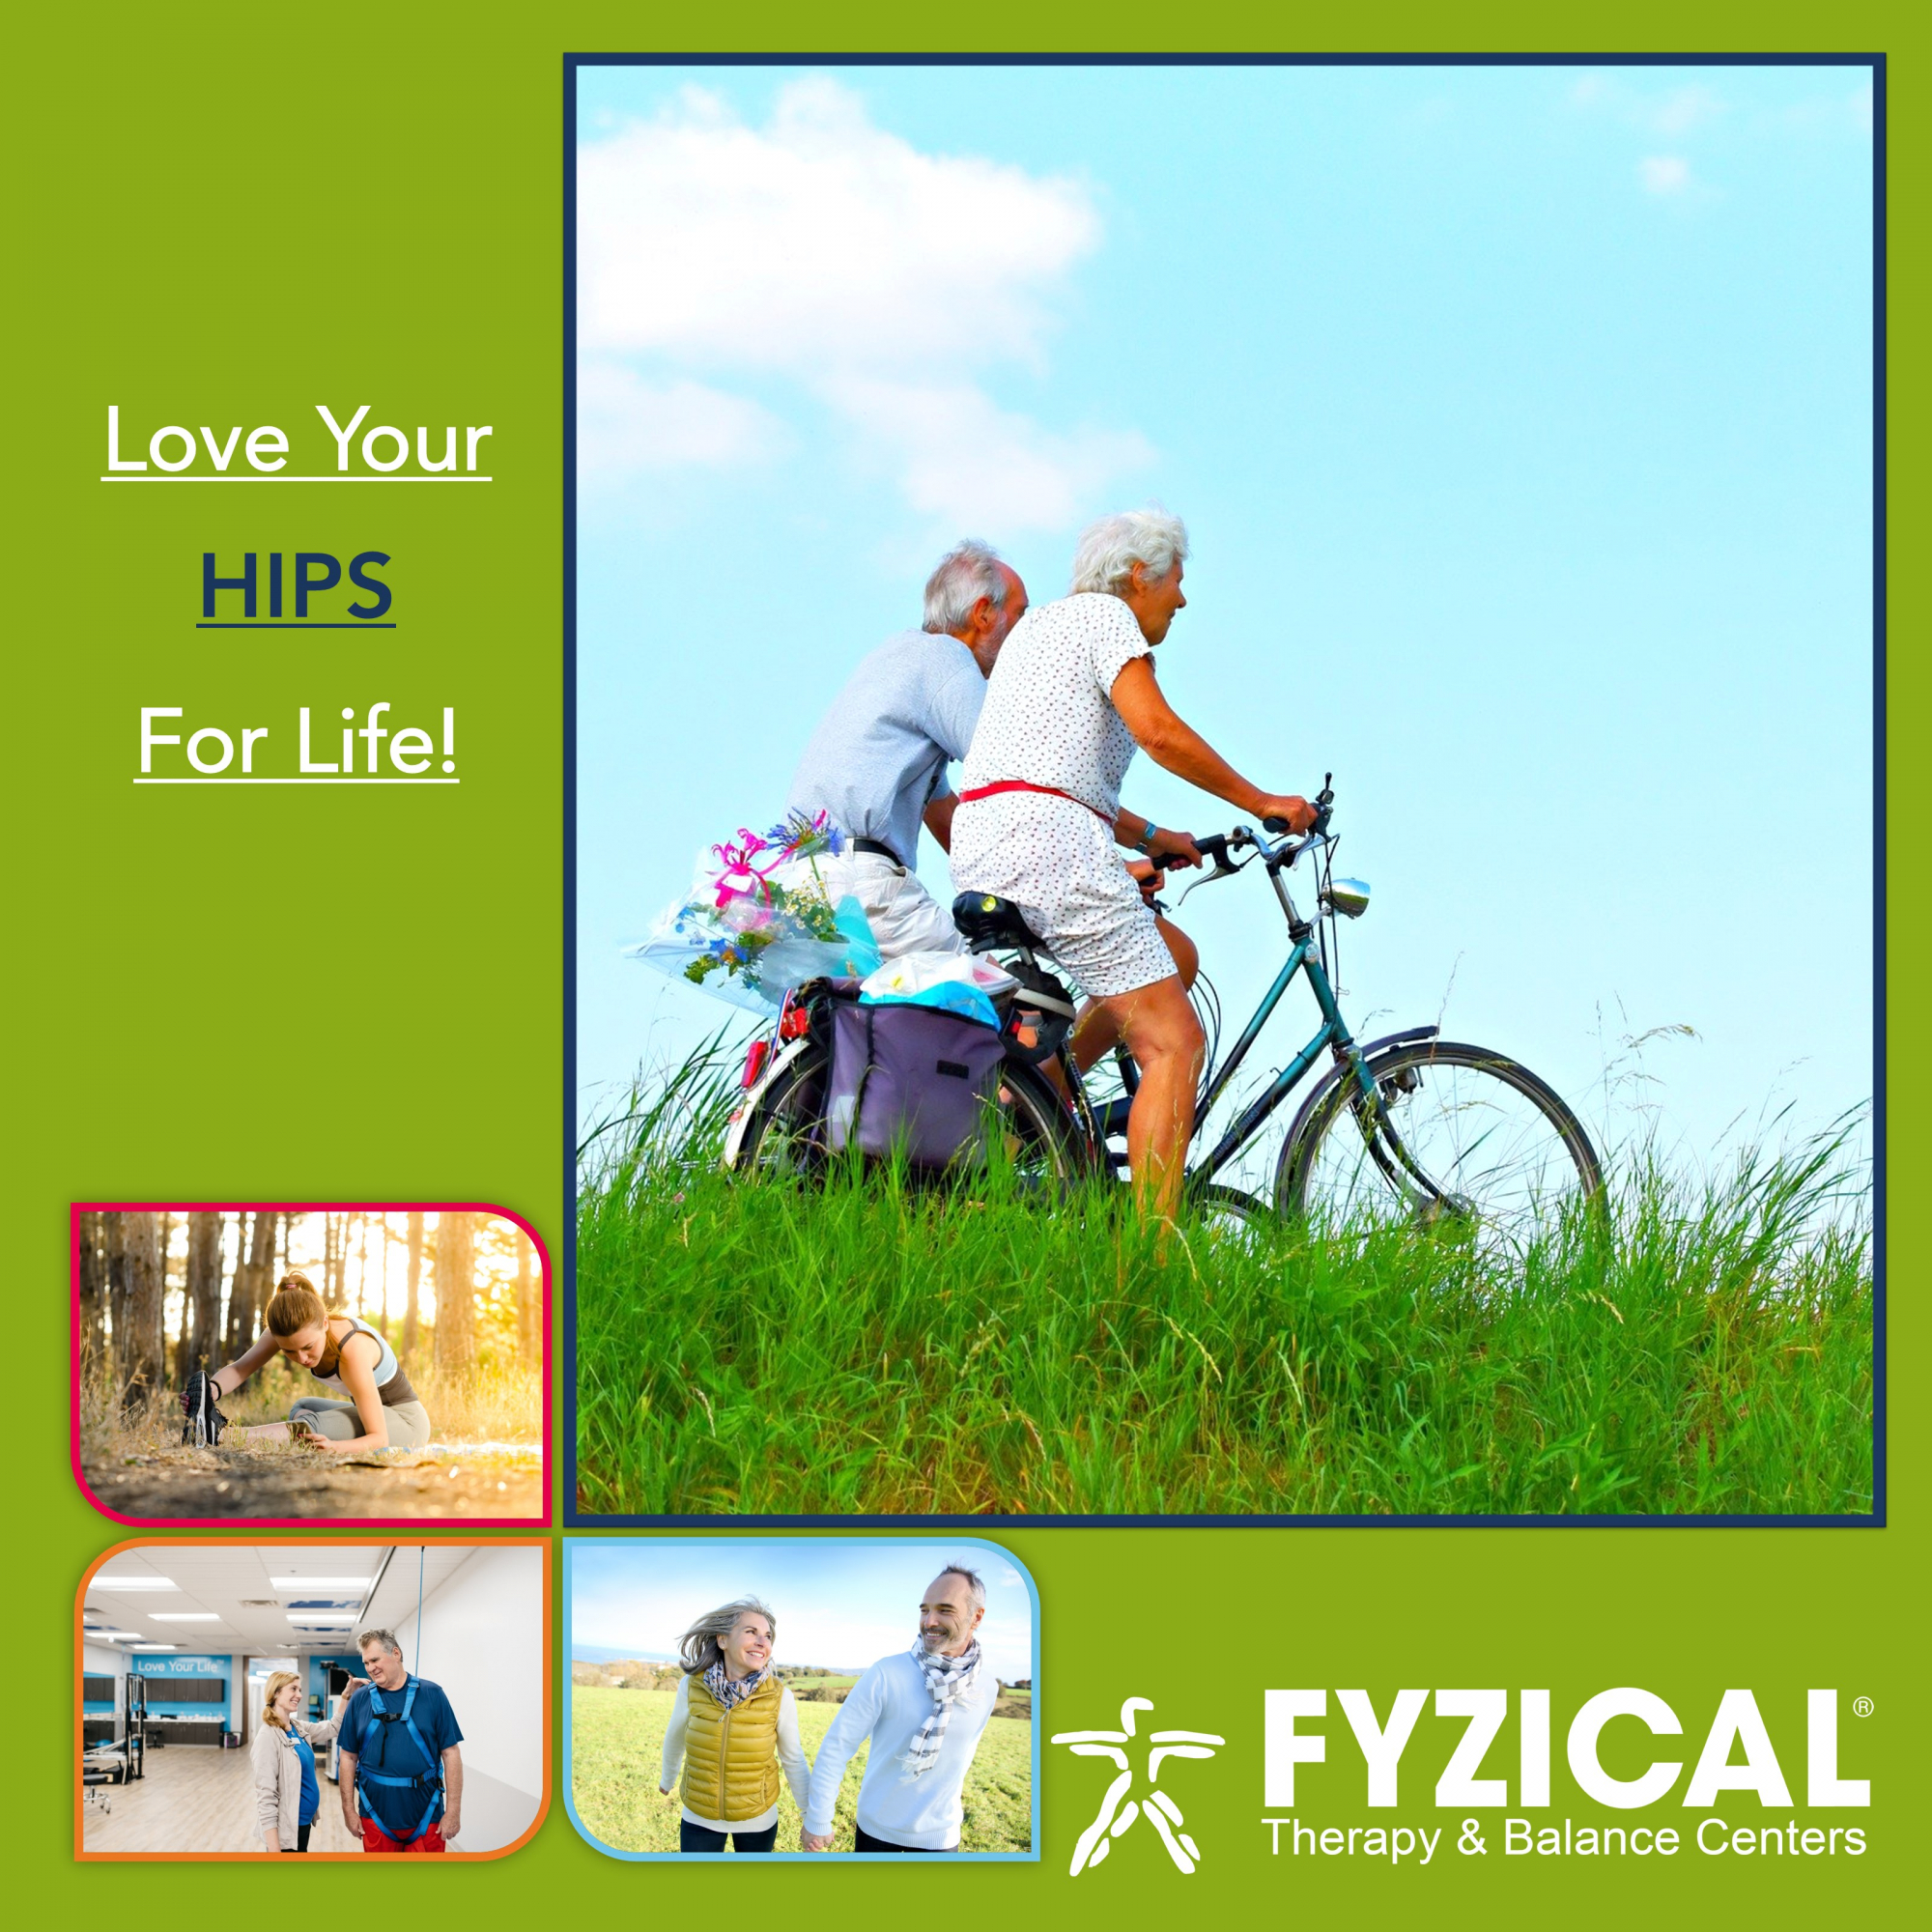 Physical Therapy Before and After Total Hip Surgery can help ensure you Love Your Hips for Life!